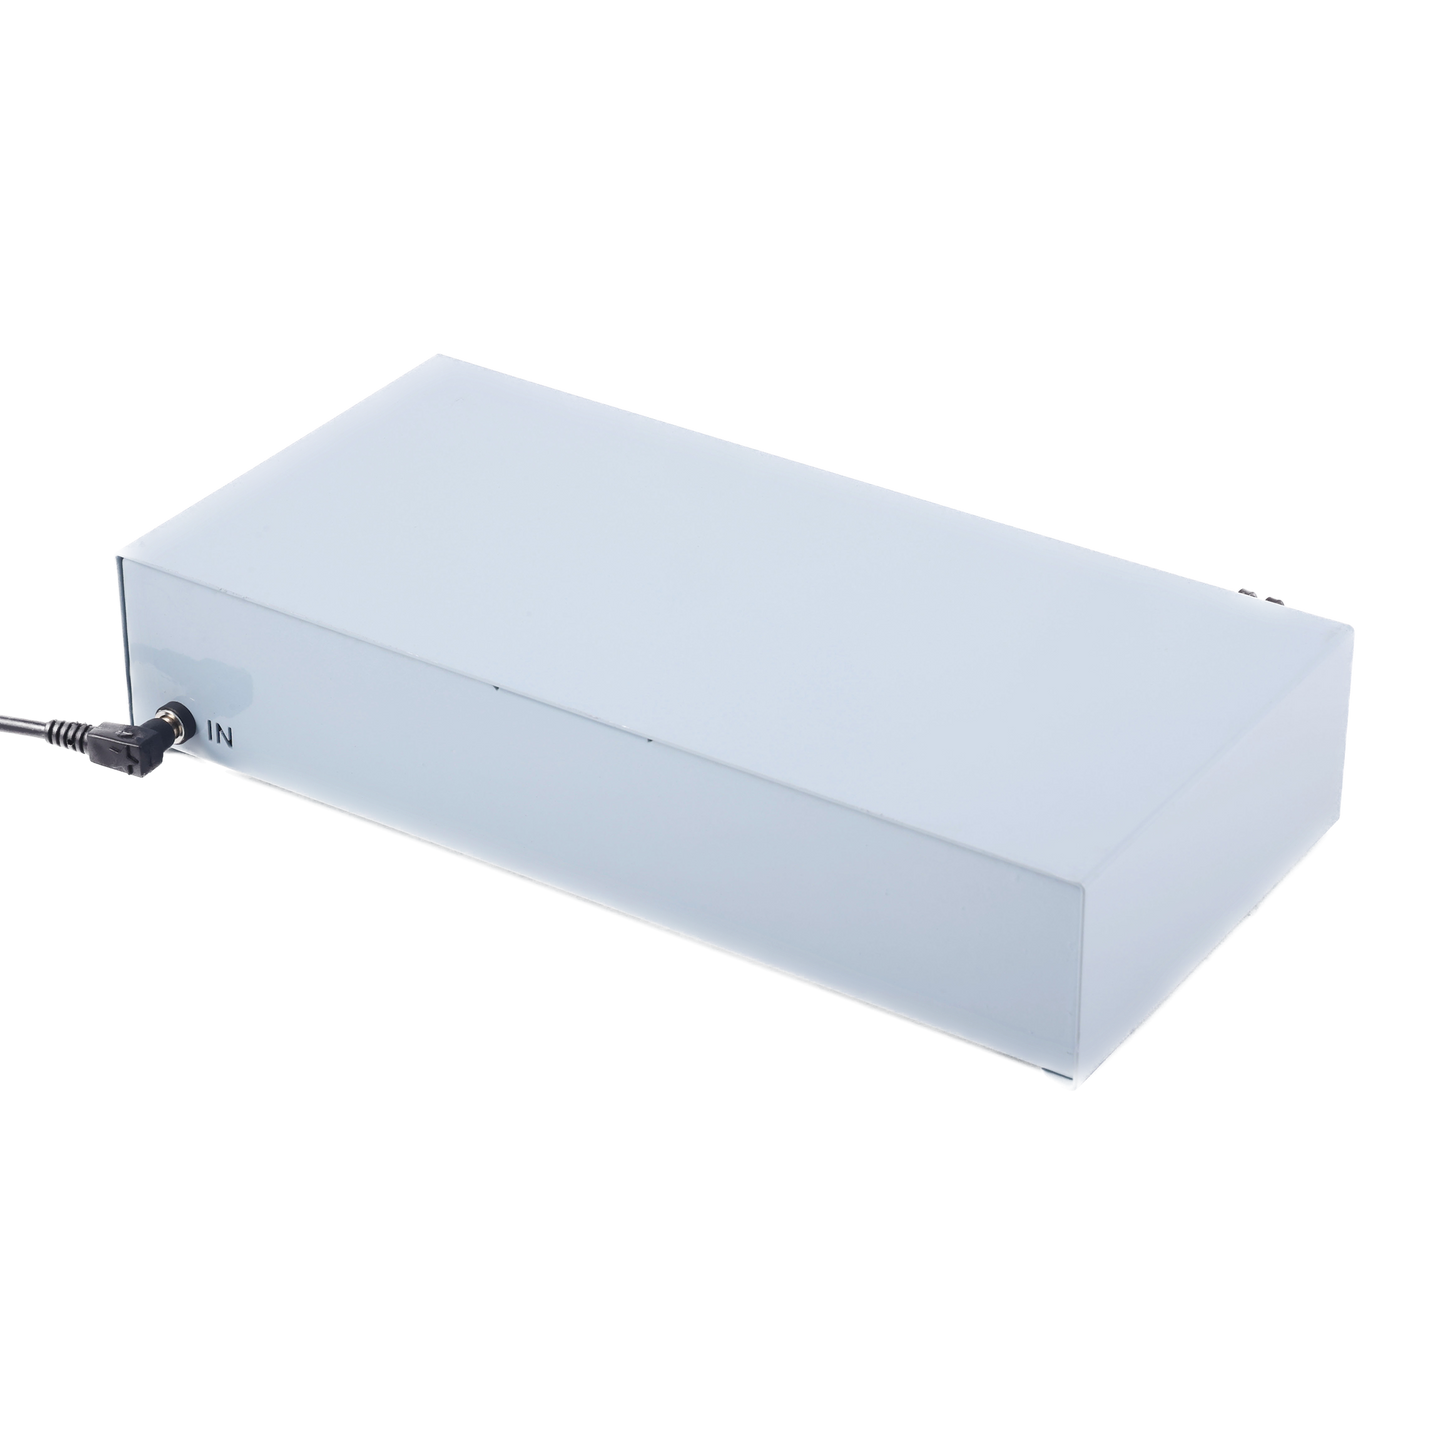 Rear view of LiIon portable power bank with USB-C, USB-A, DC 12V, DC 19V for travel, camping and more. Up to 66000 mAH